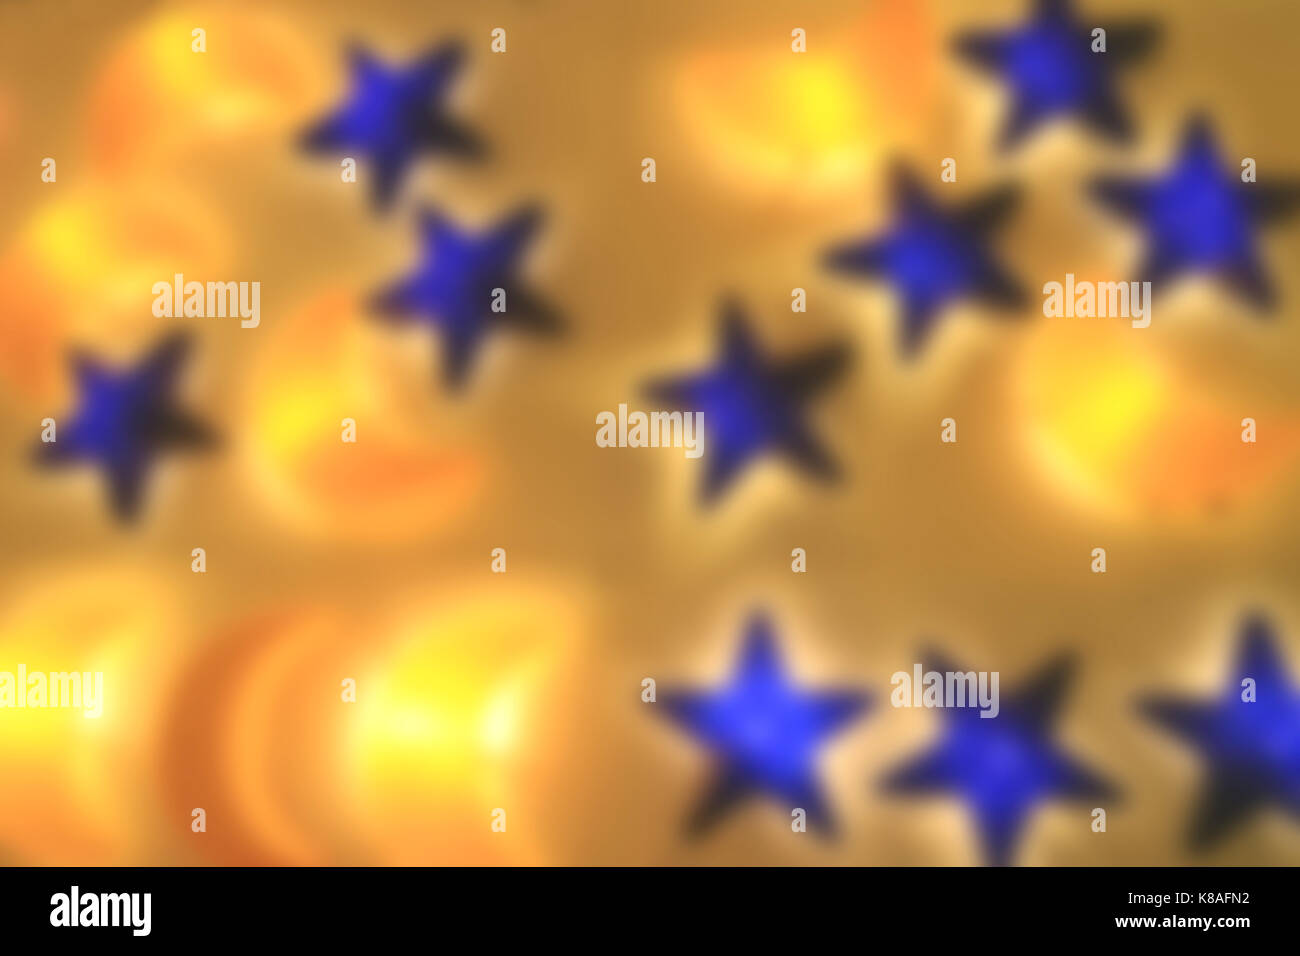 Out Of Focus Yellow Crescent Moon Shaped and Blue Star Shaped Lamps Shining on the Wall Stock Photo